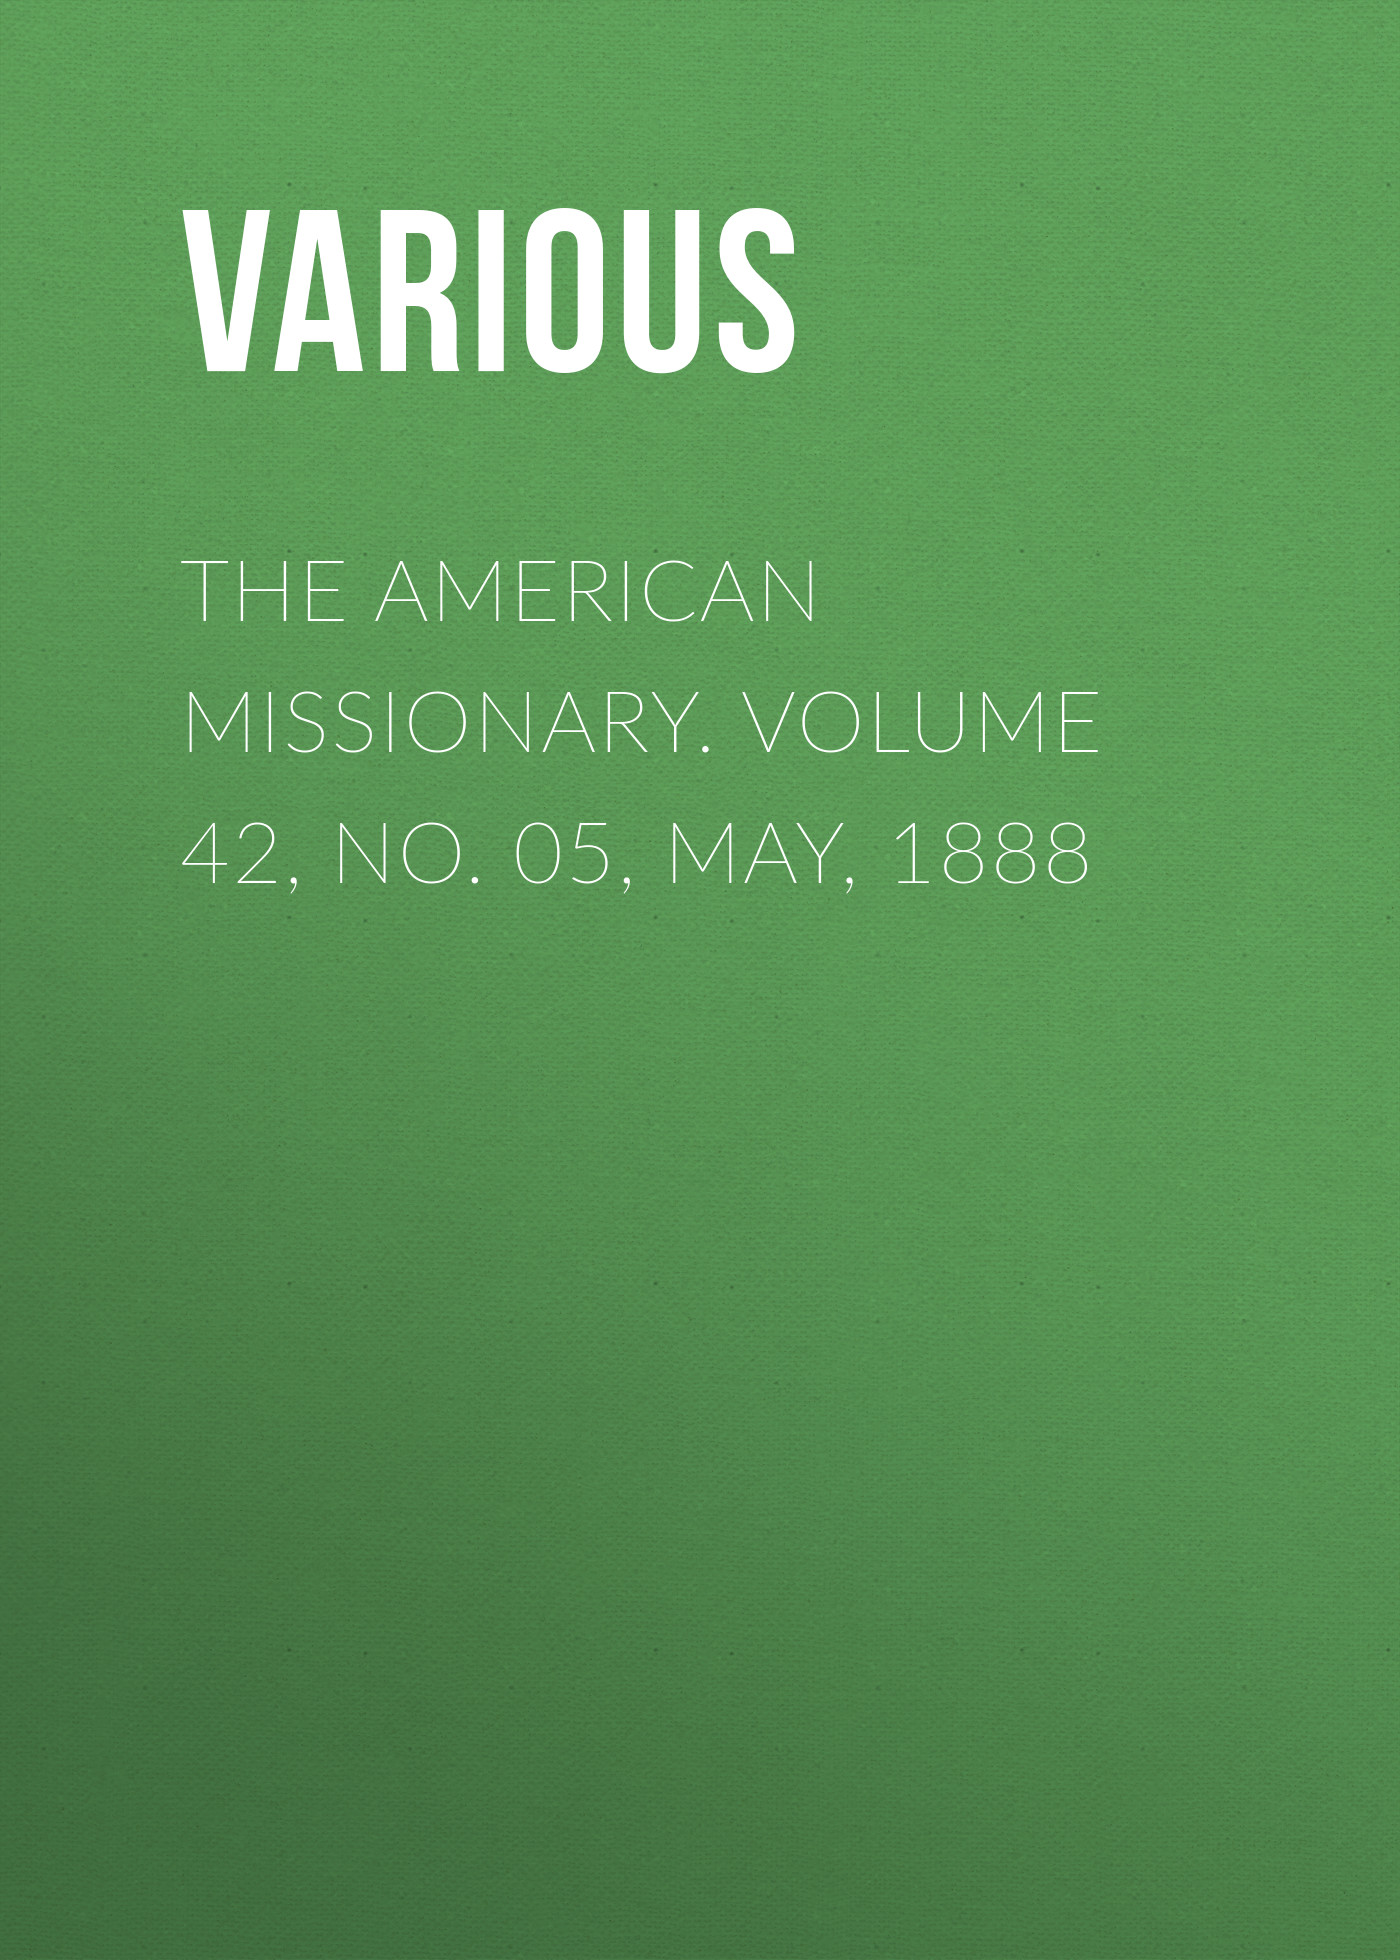 The American Missionary. Volume 42, No. 05, May, 1888